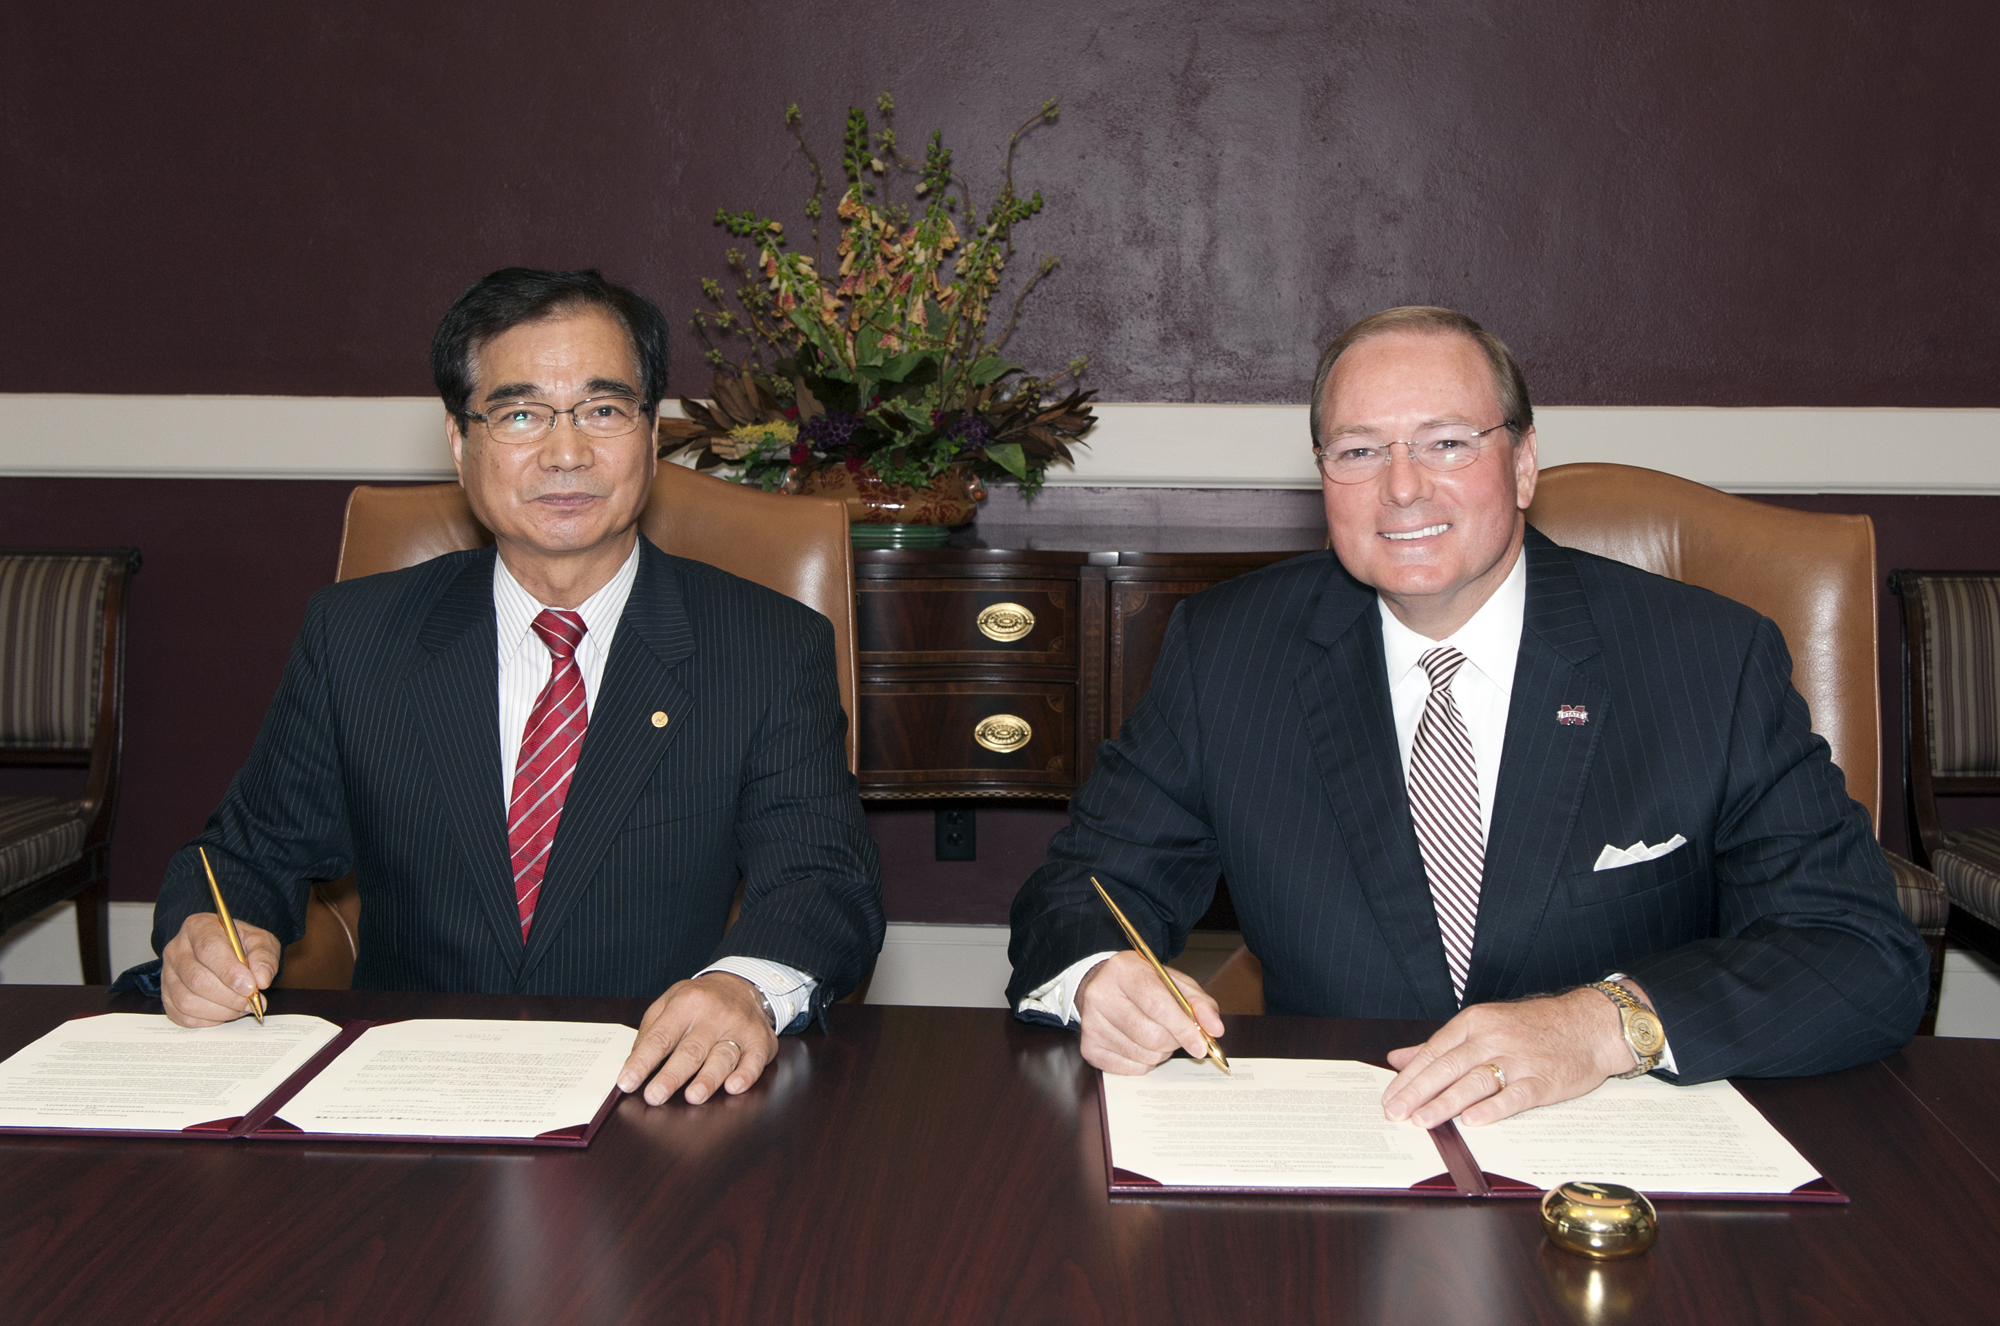 Nihon University's College of Industrial Technology Dean Minoru Ochiai and MSU President Mark E. Keenum signed a memorandum of understanding Tuesday [June 23] to enhance the educational and research opportunities for students and faculty at both institutions.